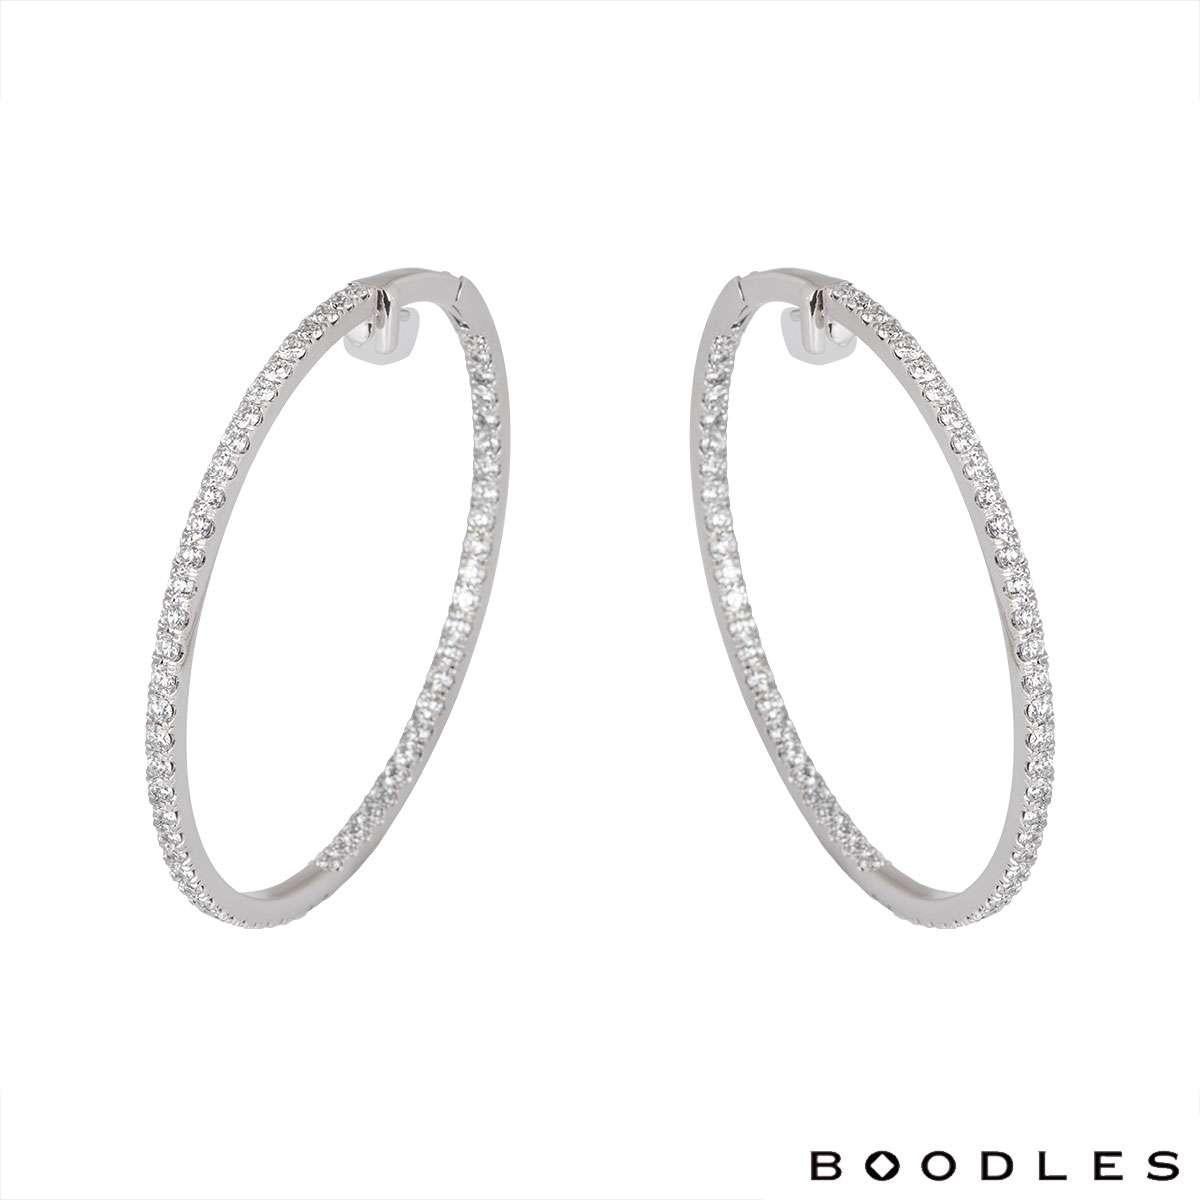 A large 18k white gold pair of diamond hoop earrings by Boodles. The earrings consist of 120 round brilliant cut diamonds set on the outer and inner line of the hoops with a total weight of 4.41ct. The earrings feature post and lever hinged fittings